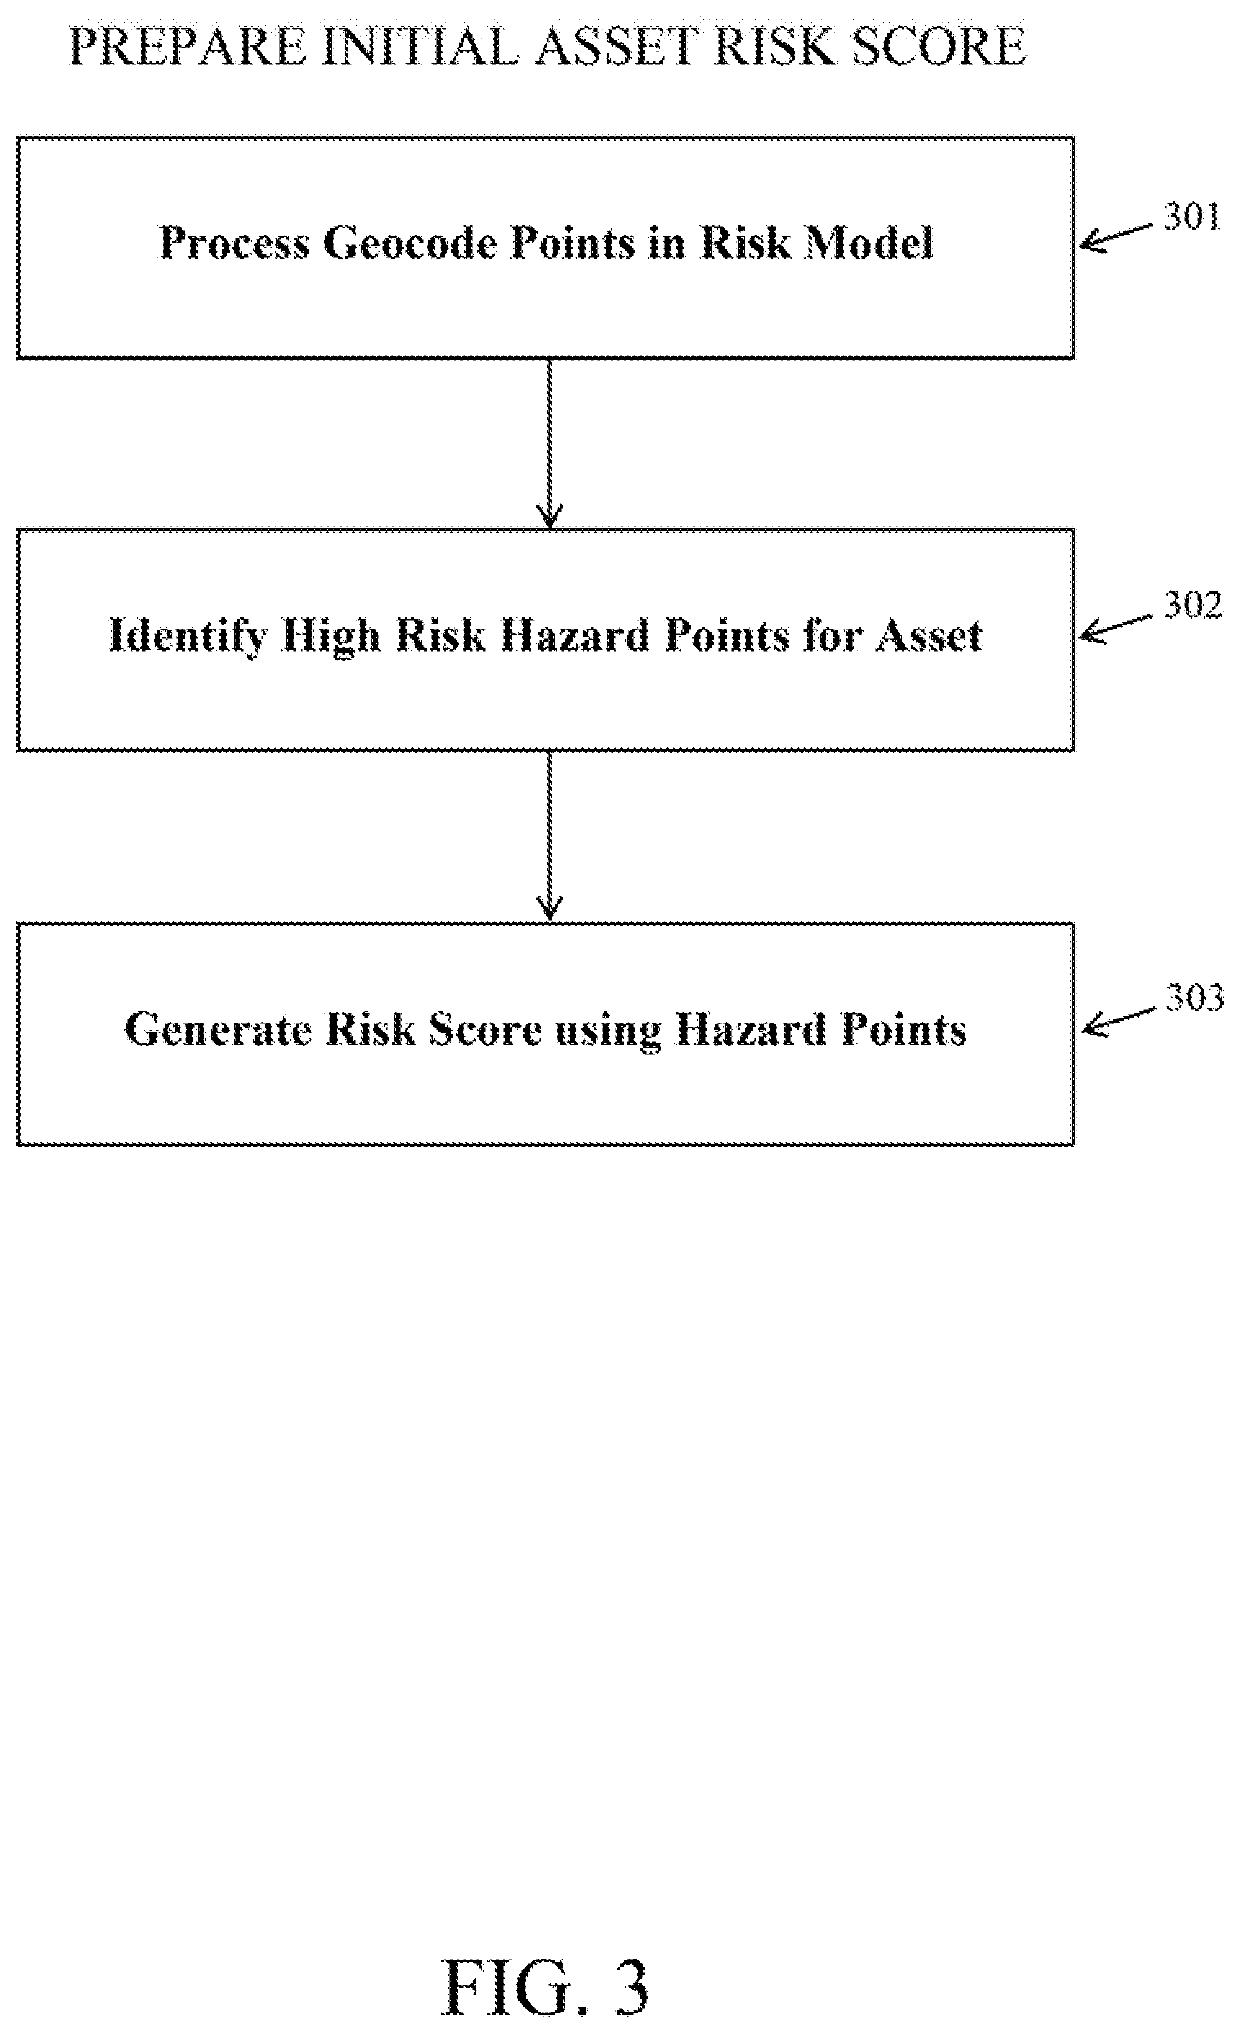 Method and System Configured for Risk Asset Data Collection